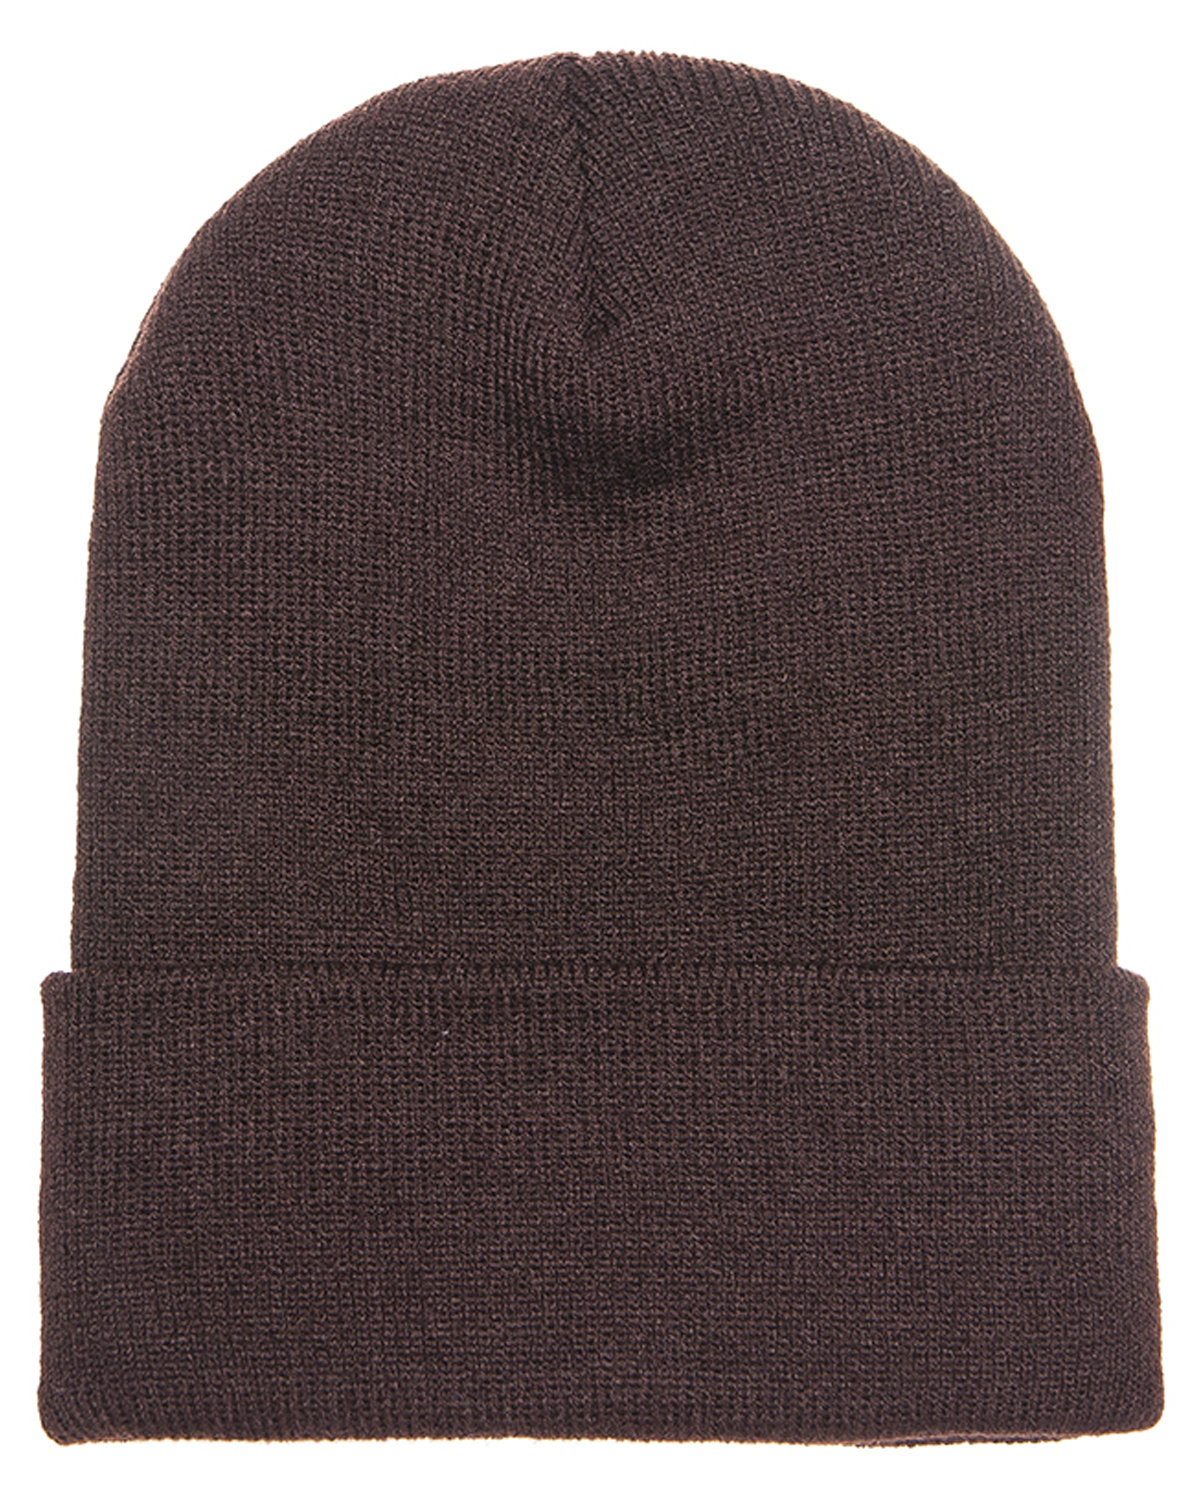 Beanie Adult alphabroder Yupoong Cuffed | Knit